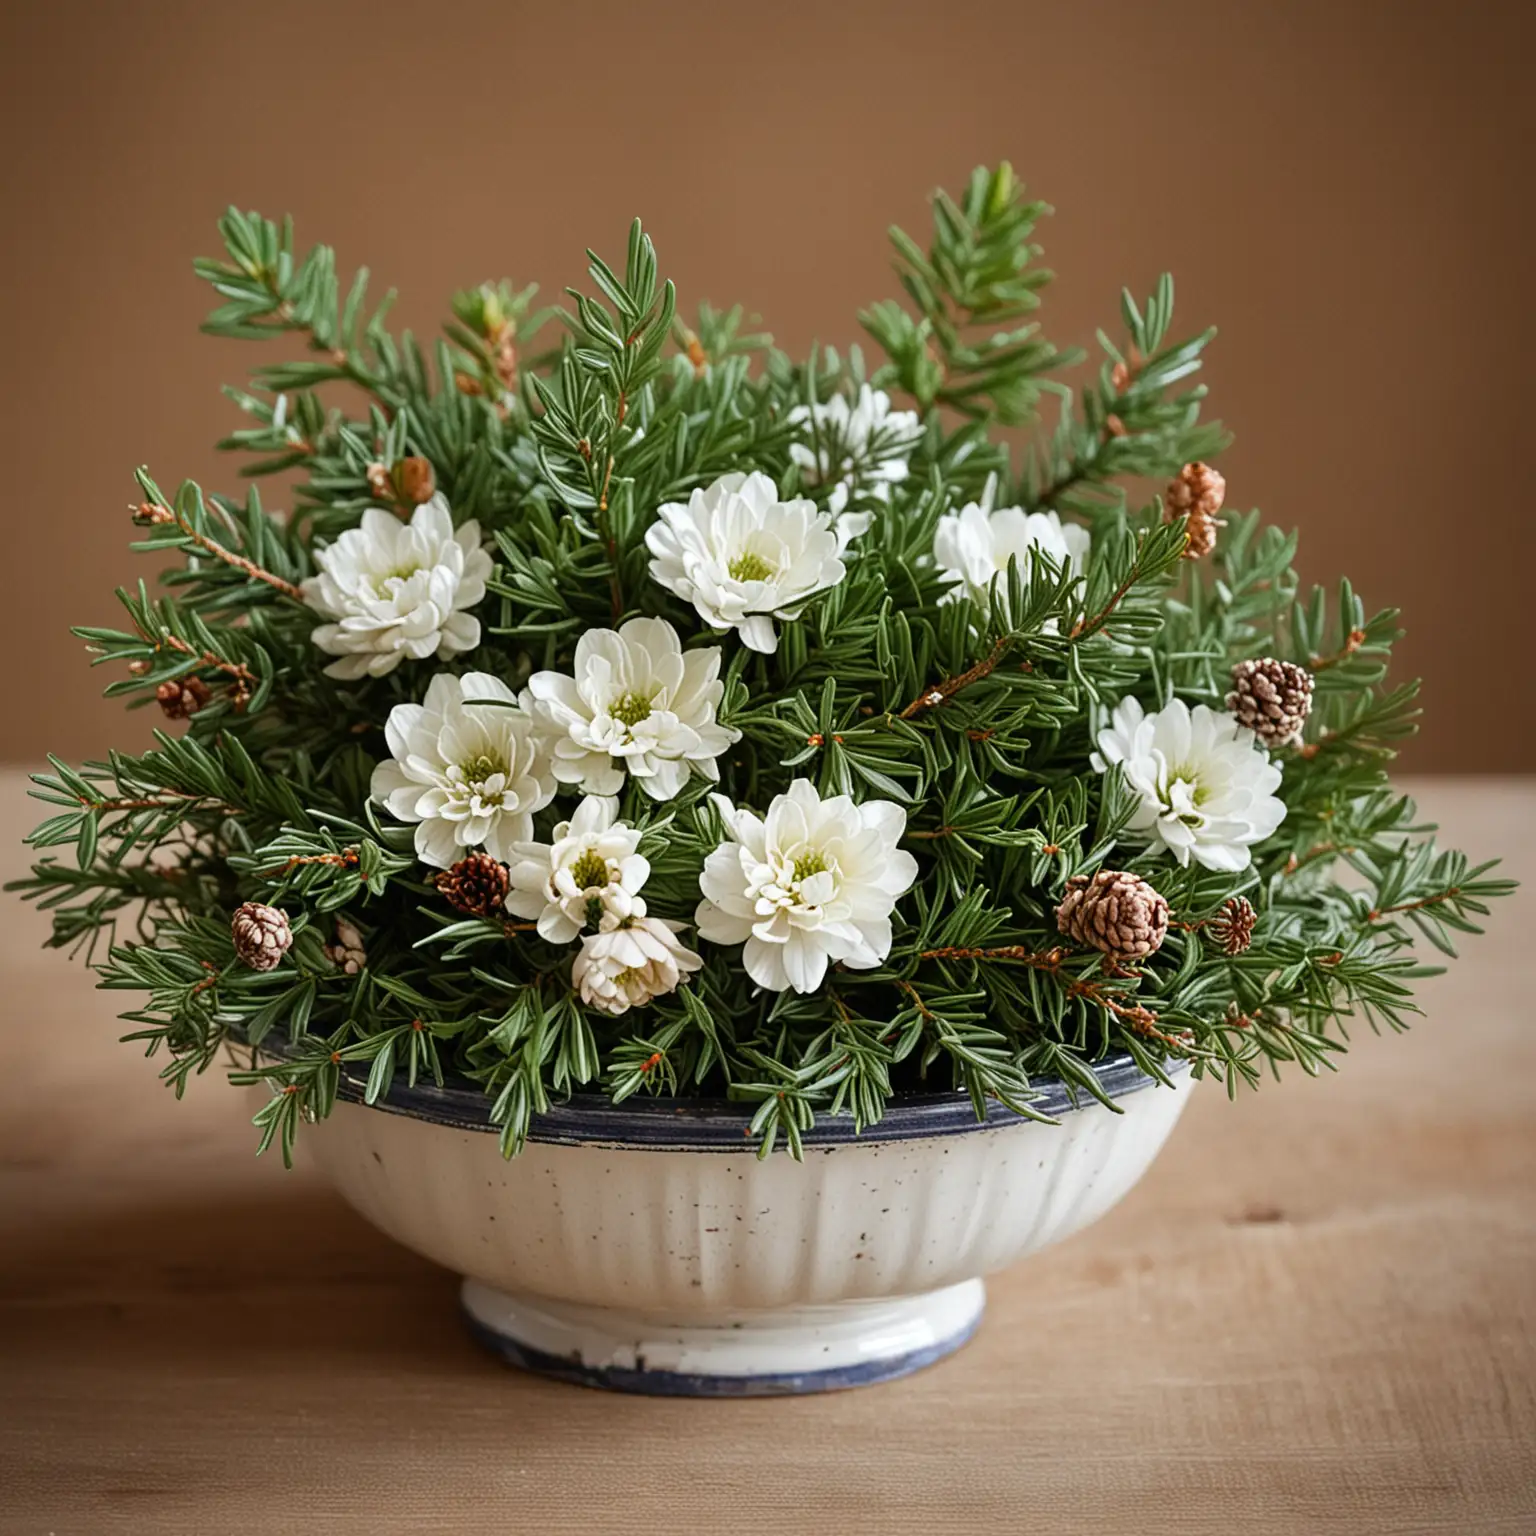 Vintage-Winter-Wedding-Centerpiece-with-Evergreen-and-Flowers